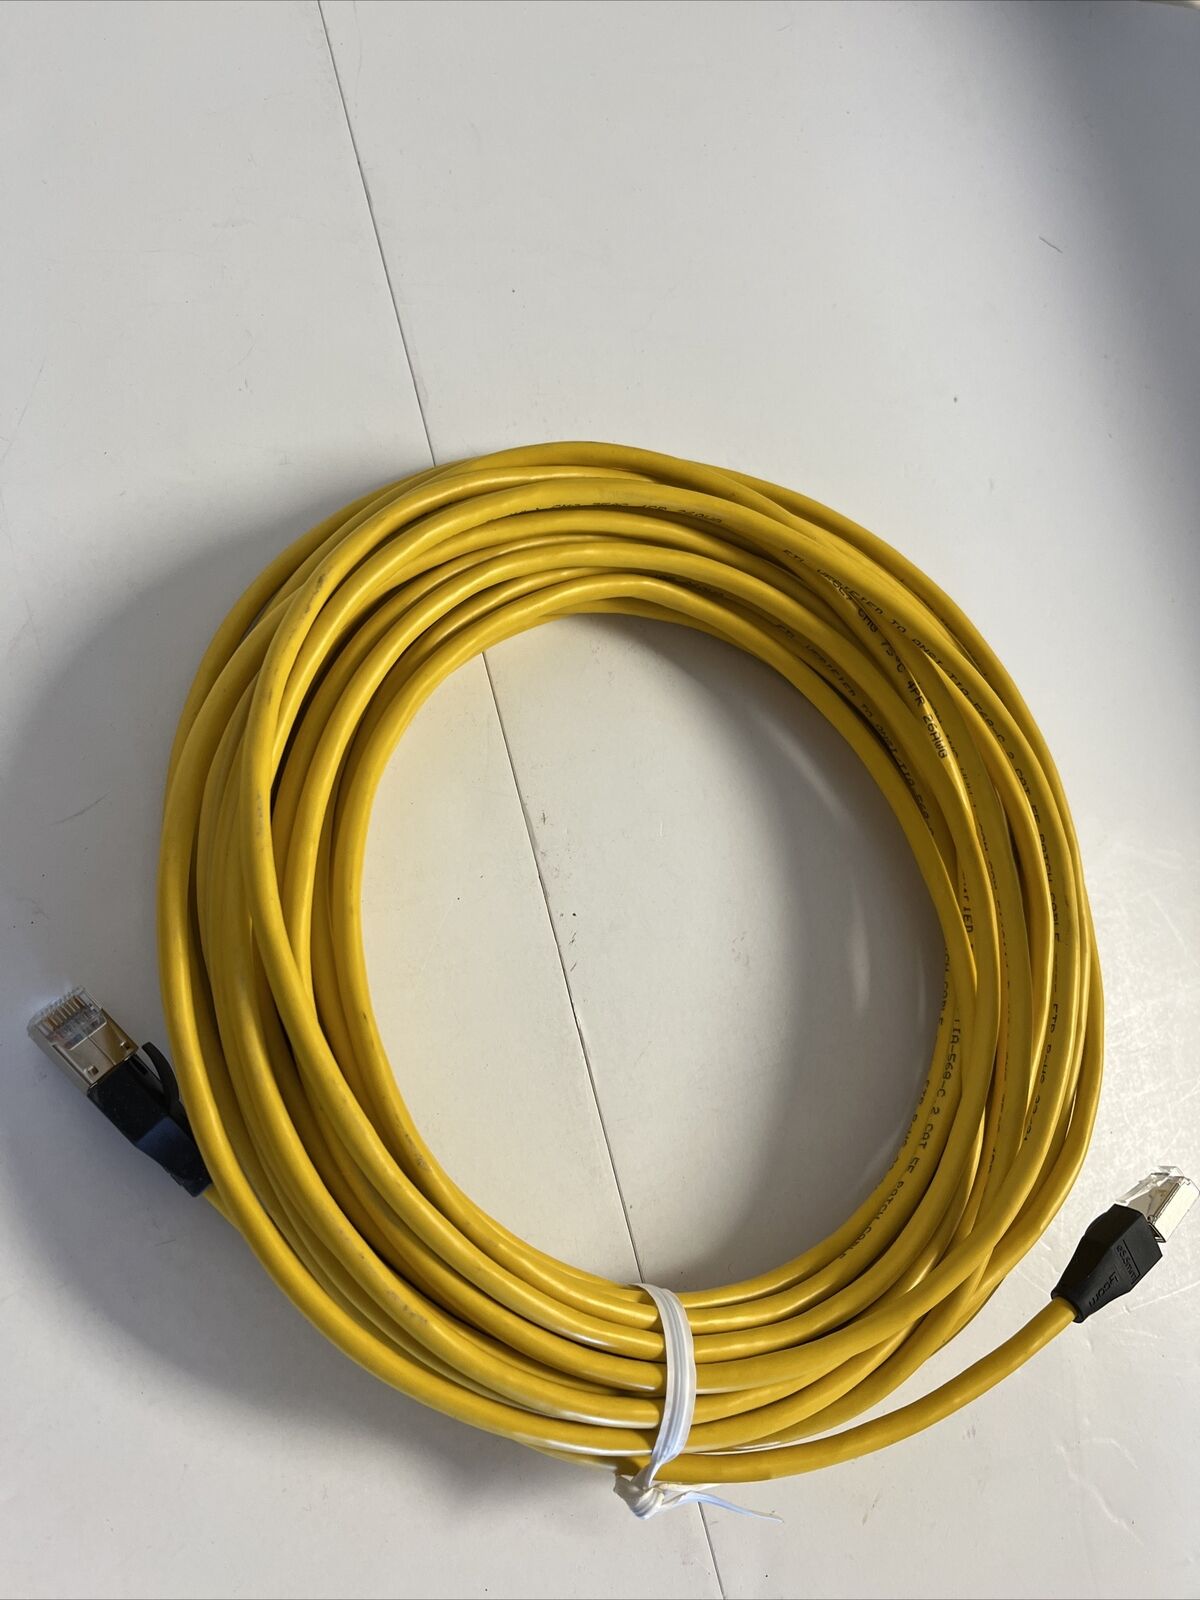 L-Com New Opened Shielded Cat 5E EIA568 Patch Cable, RJ45 Yellow 50ft